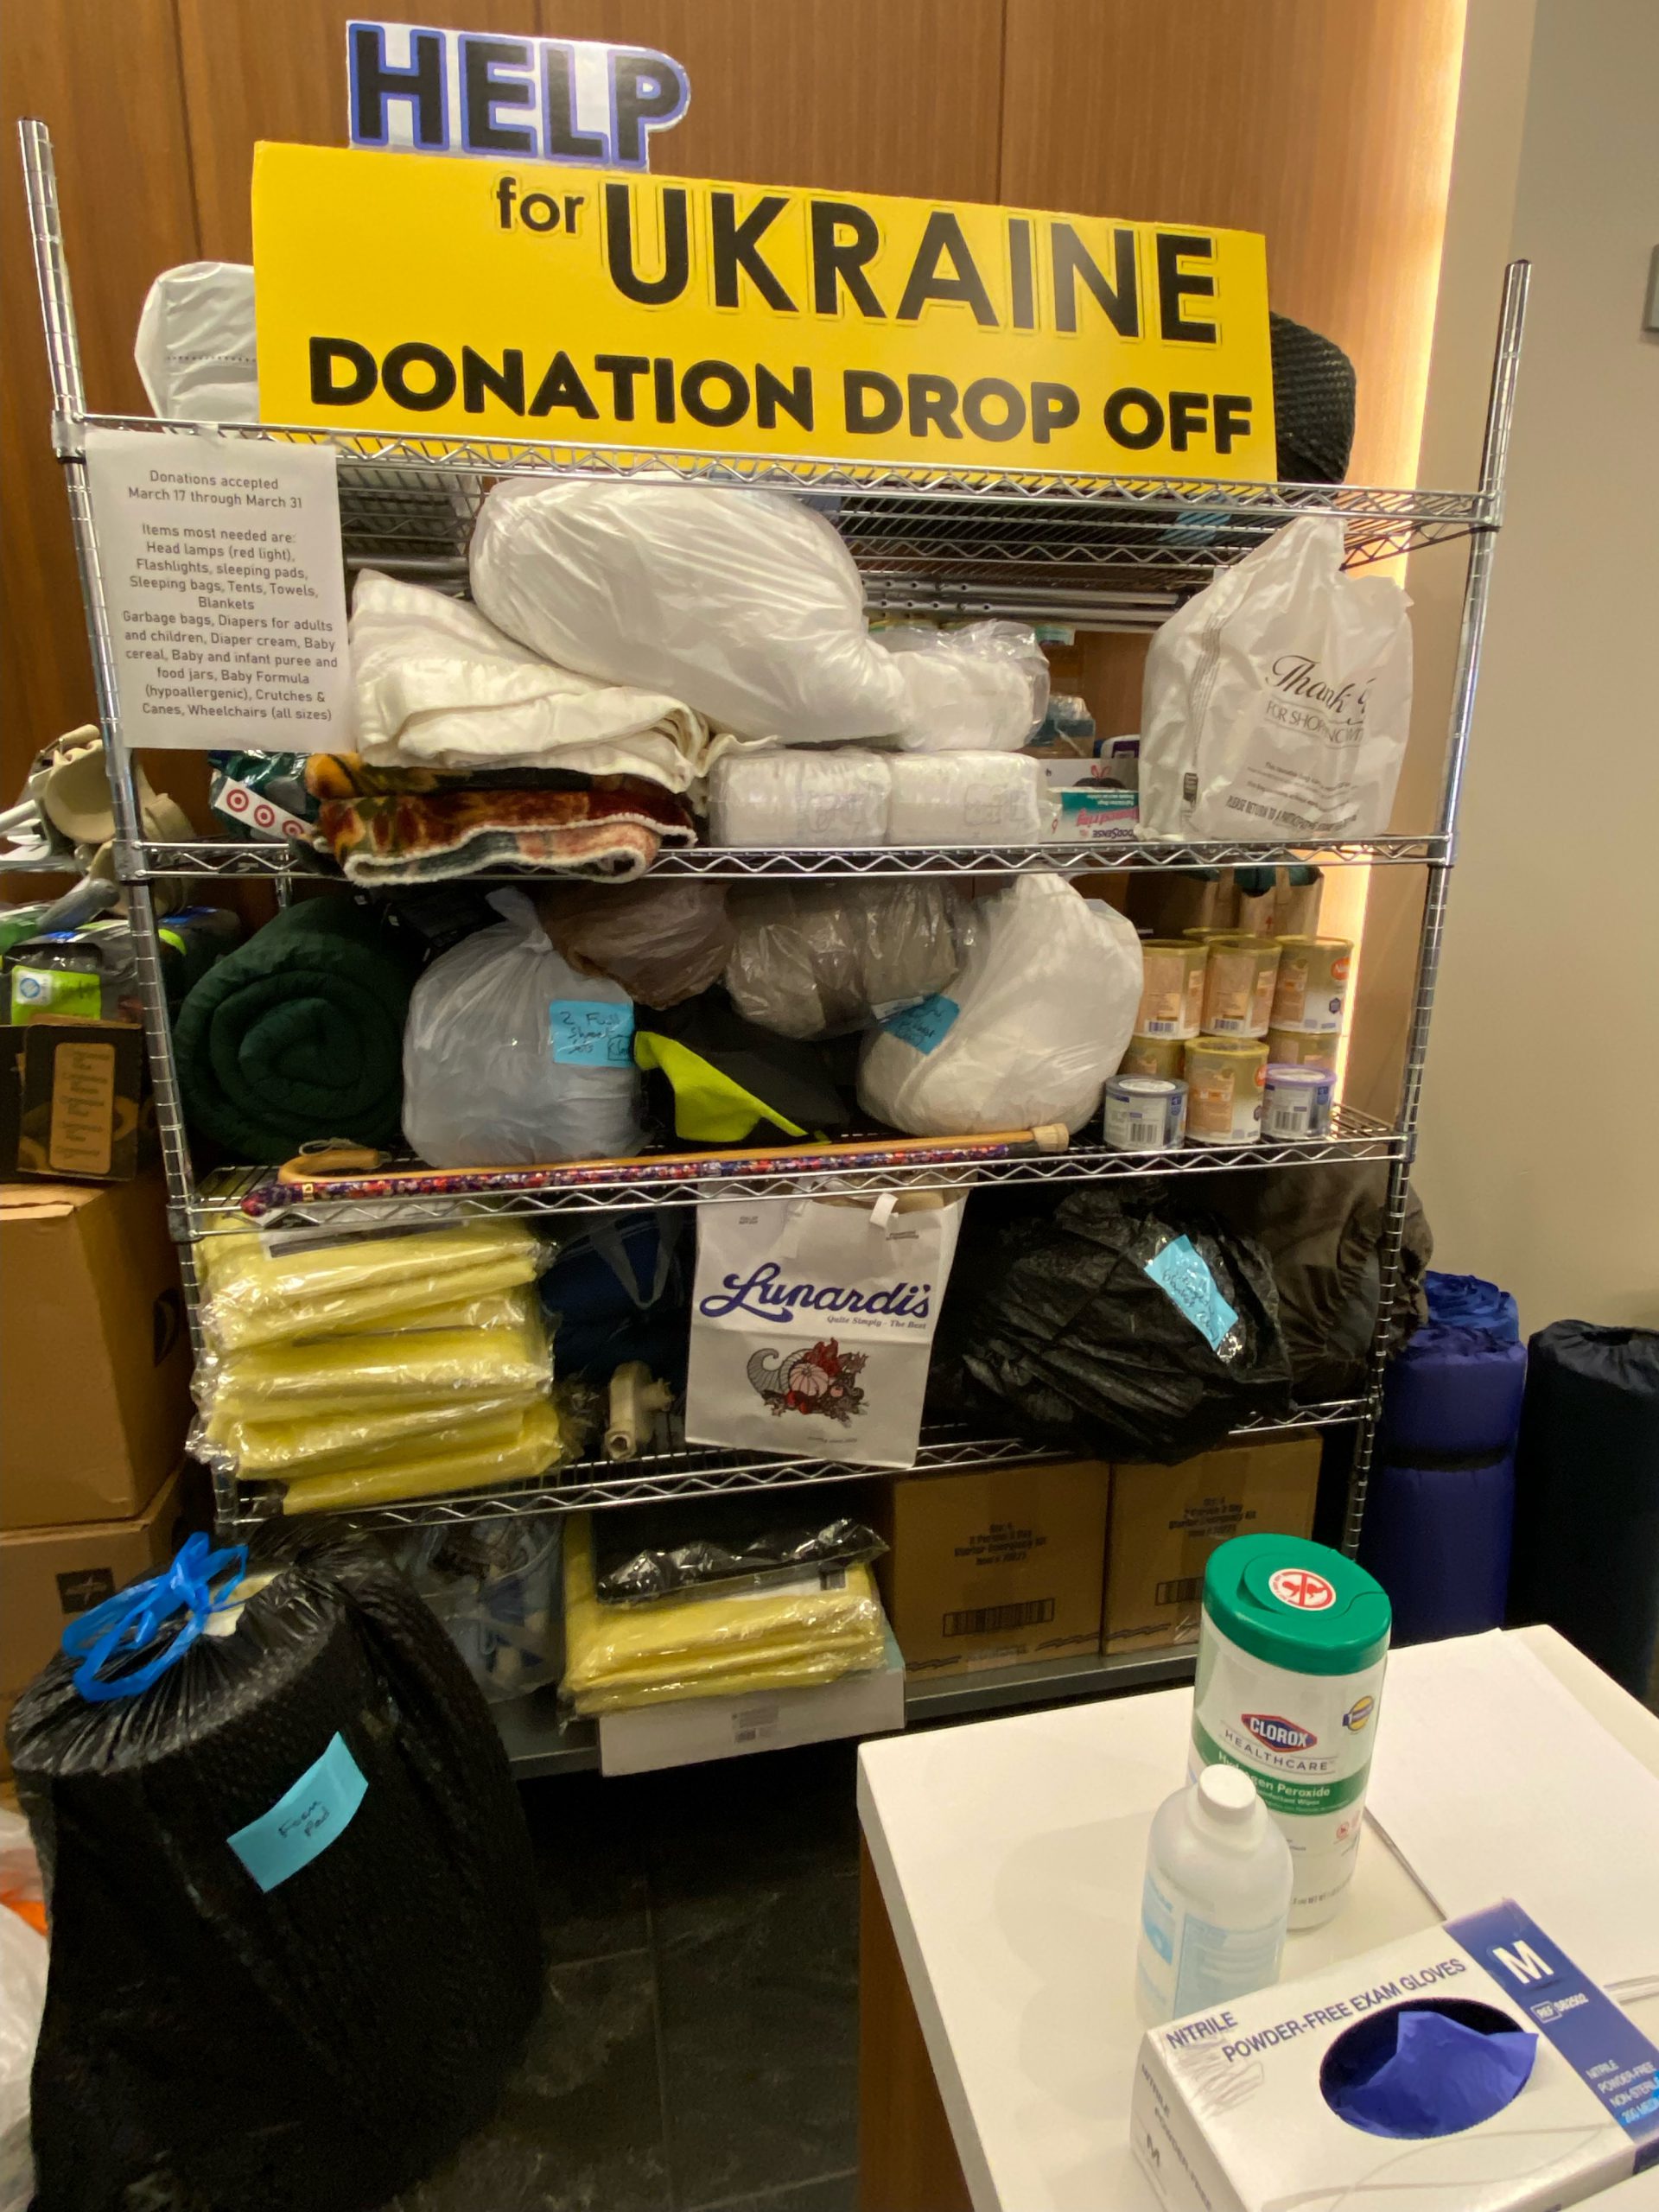 A donation drop-off cart at Sutter's CPMC in San Francisco